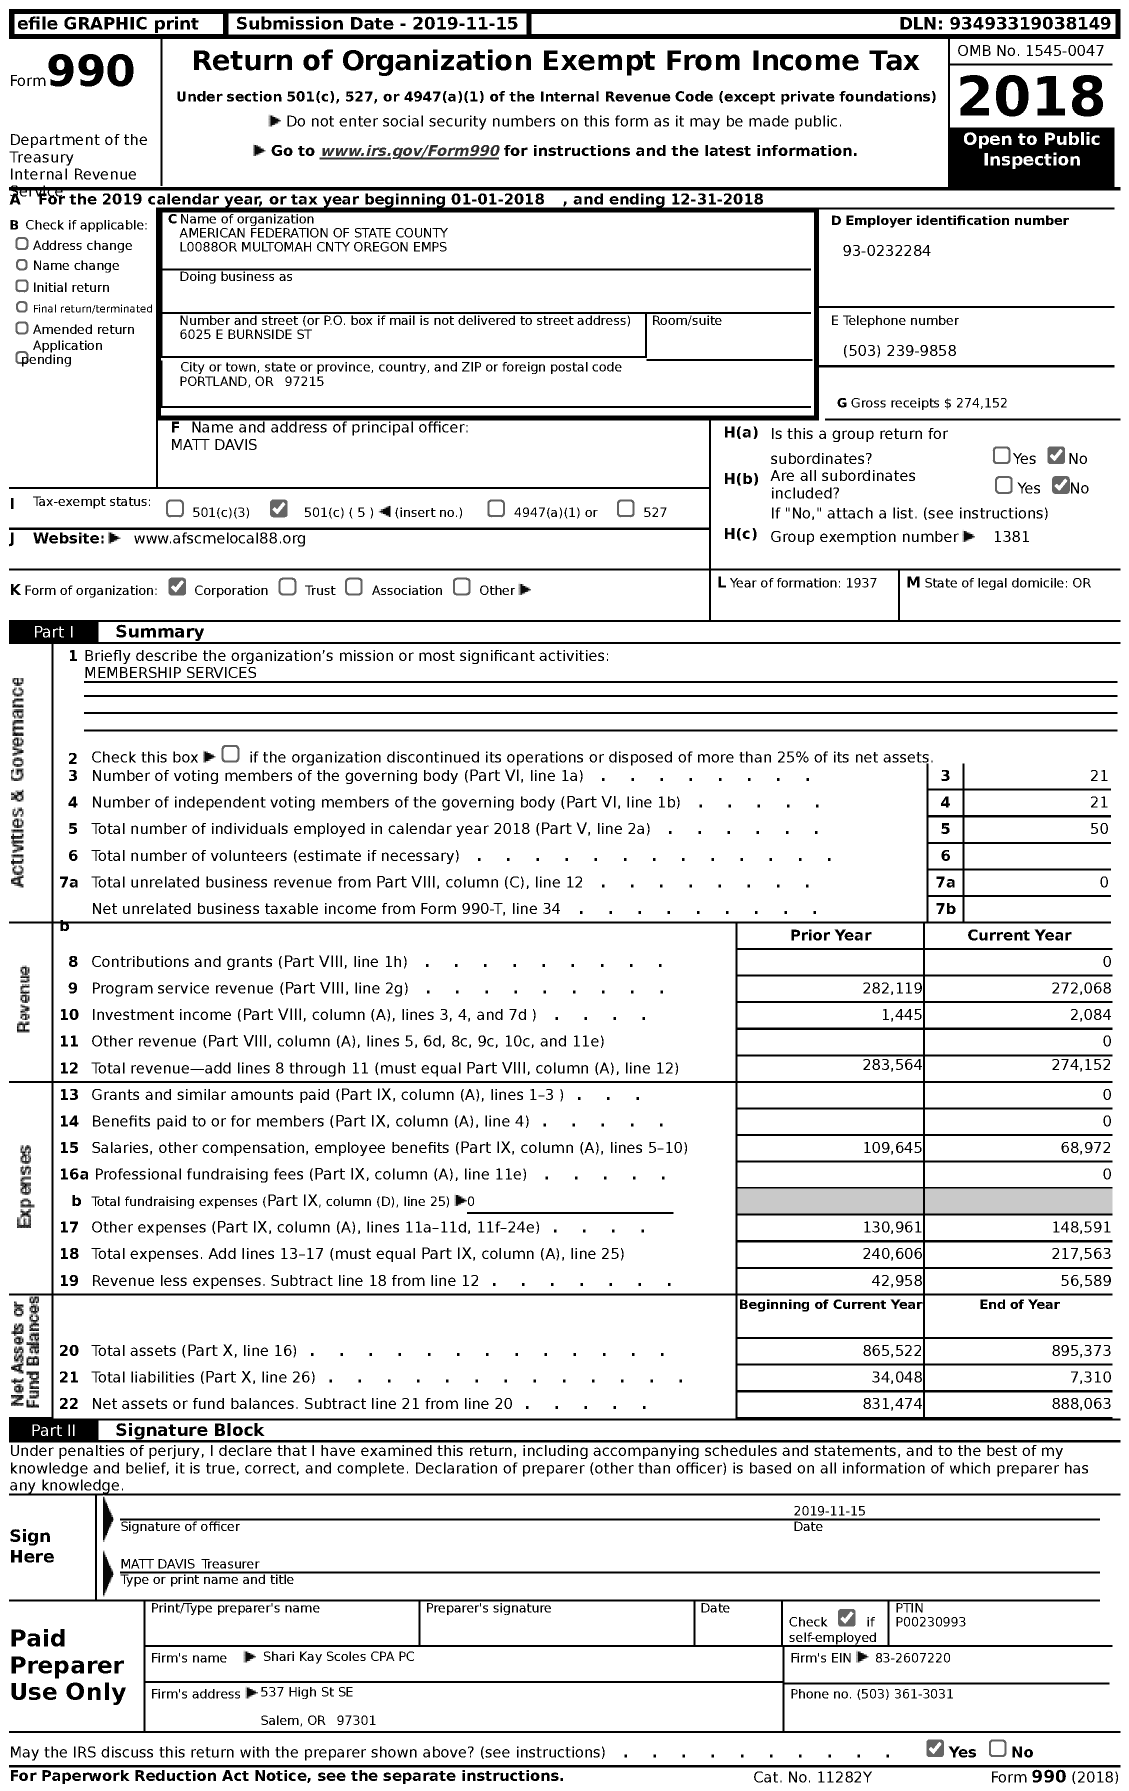 Image of first page of 2018 Form 990 for American Federation of State County & Municipal Employees - L0088or Multomah Cnty Oregon Emps